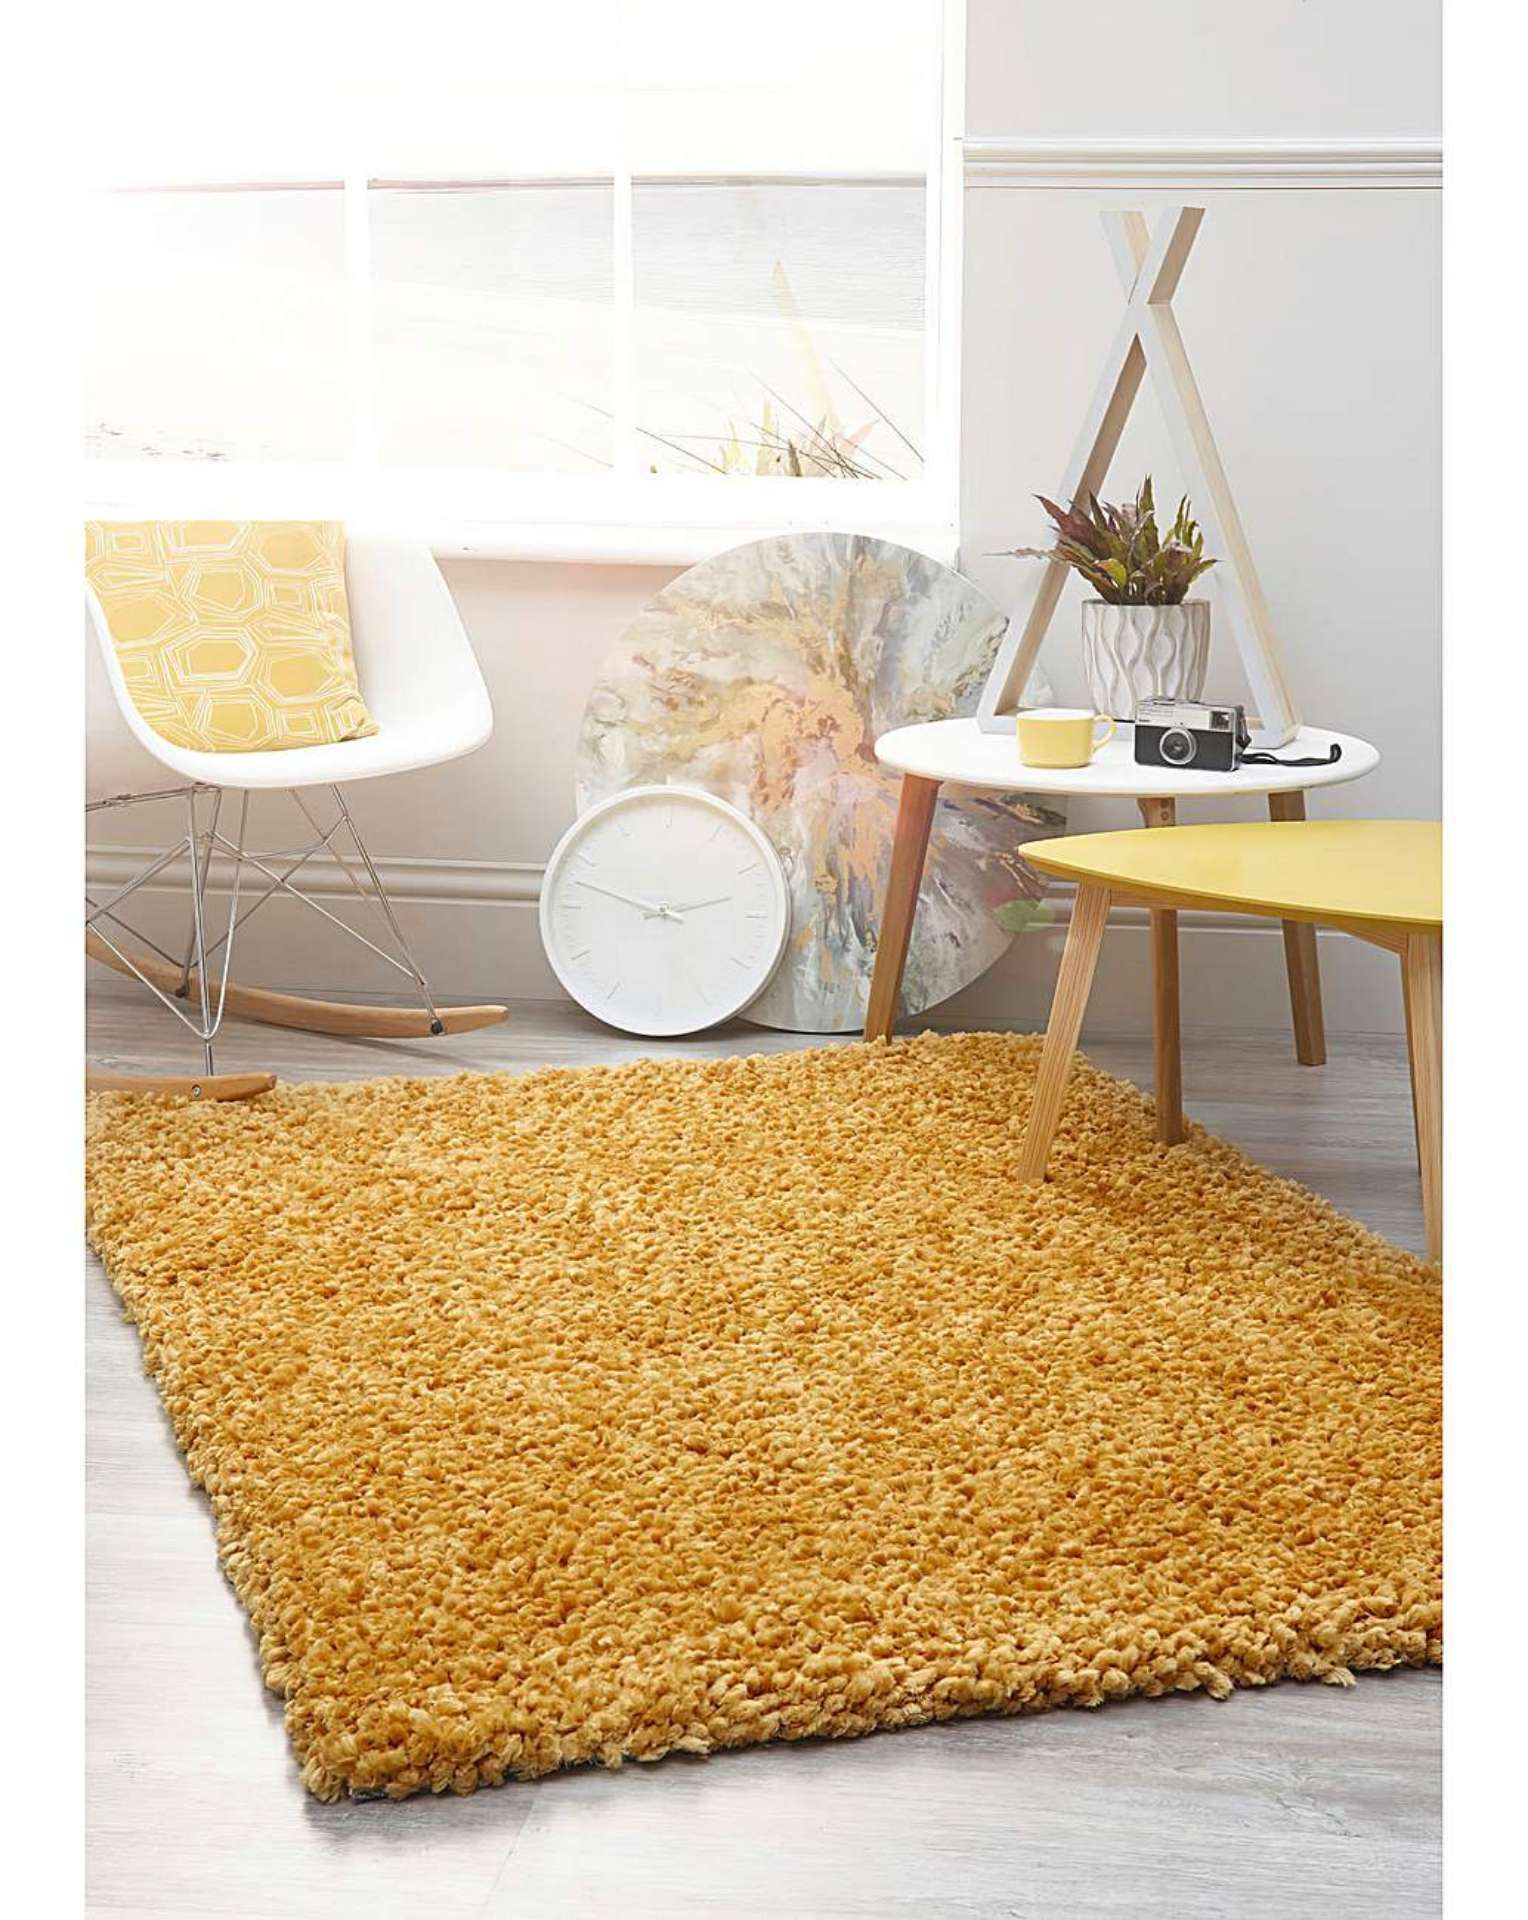 3 X BRAND NEW OCHRE SUPERSOFT INDULGENCE RUGS 67 X 200CM RRP £119 EACH R12-8